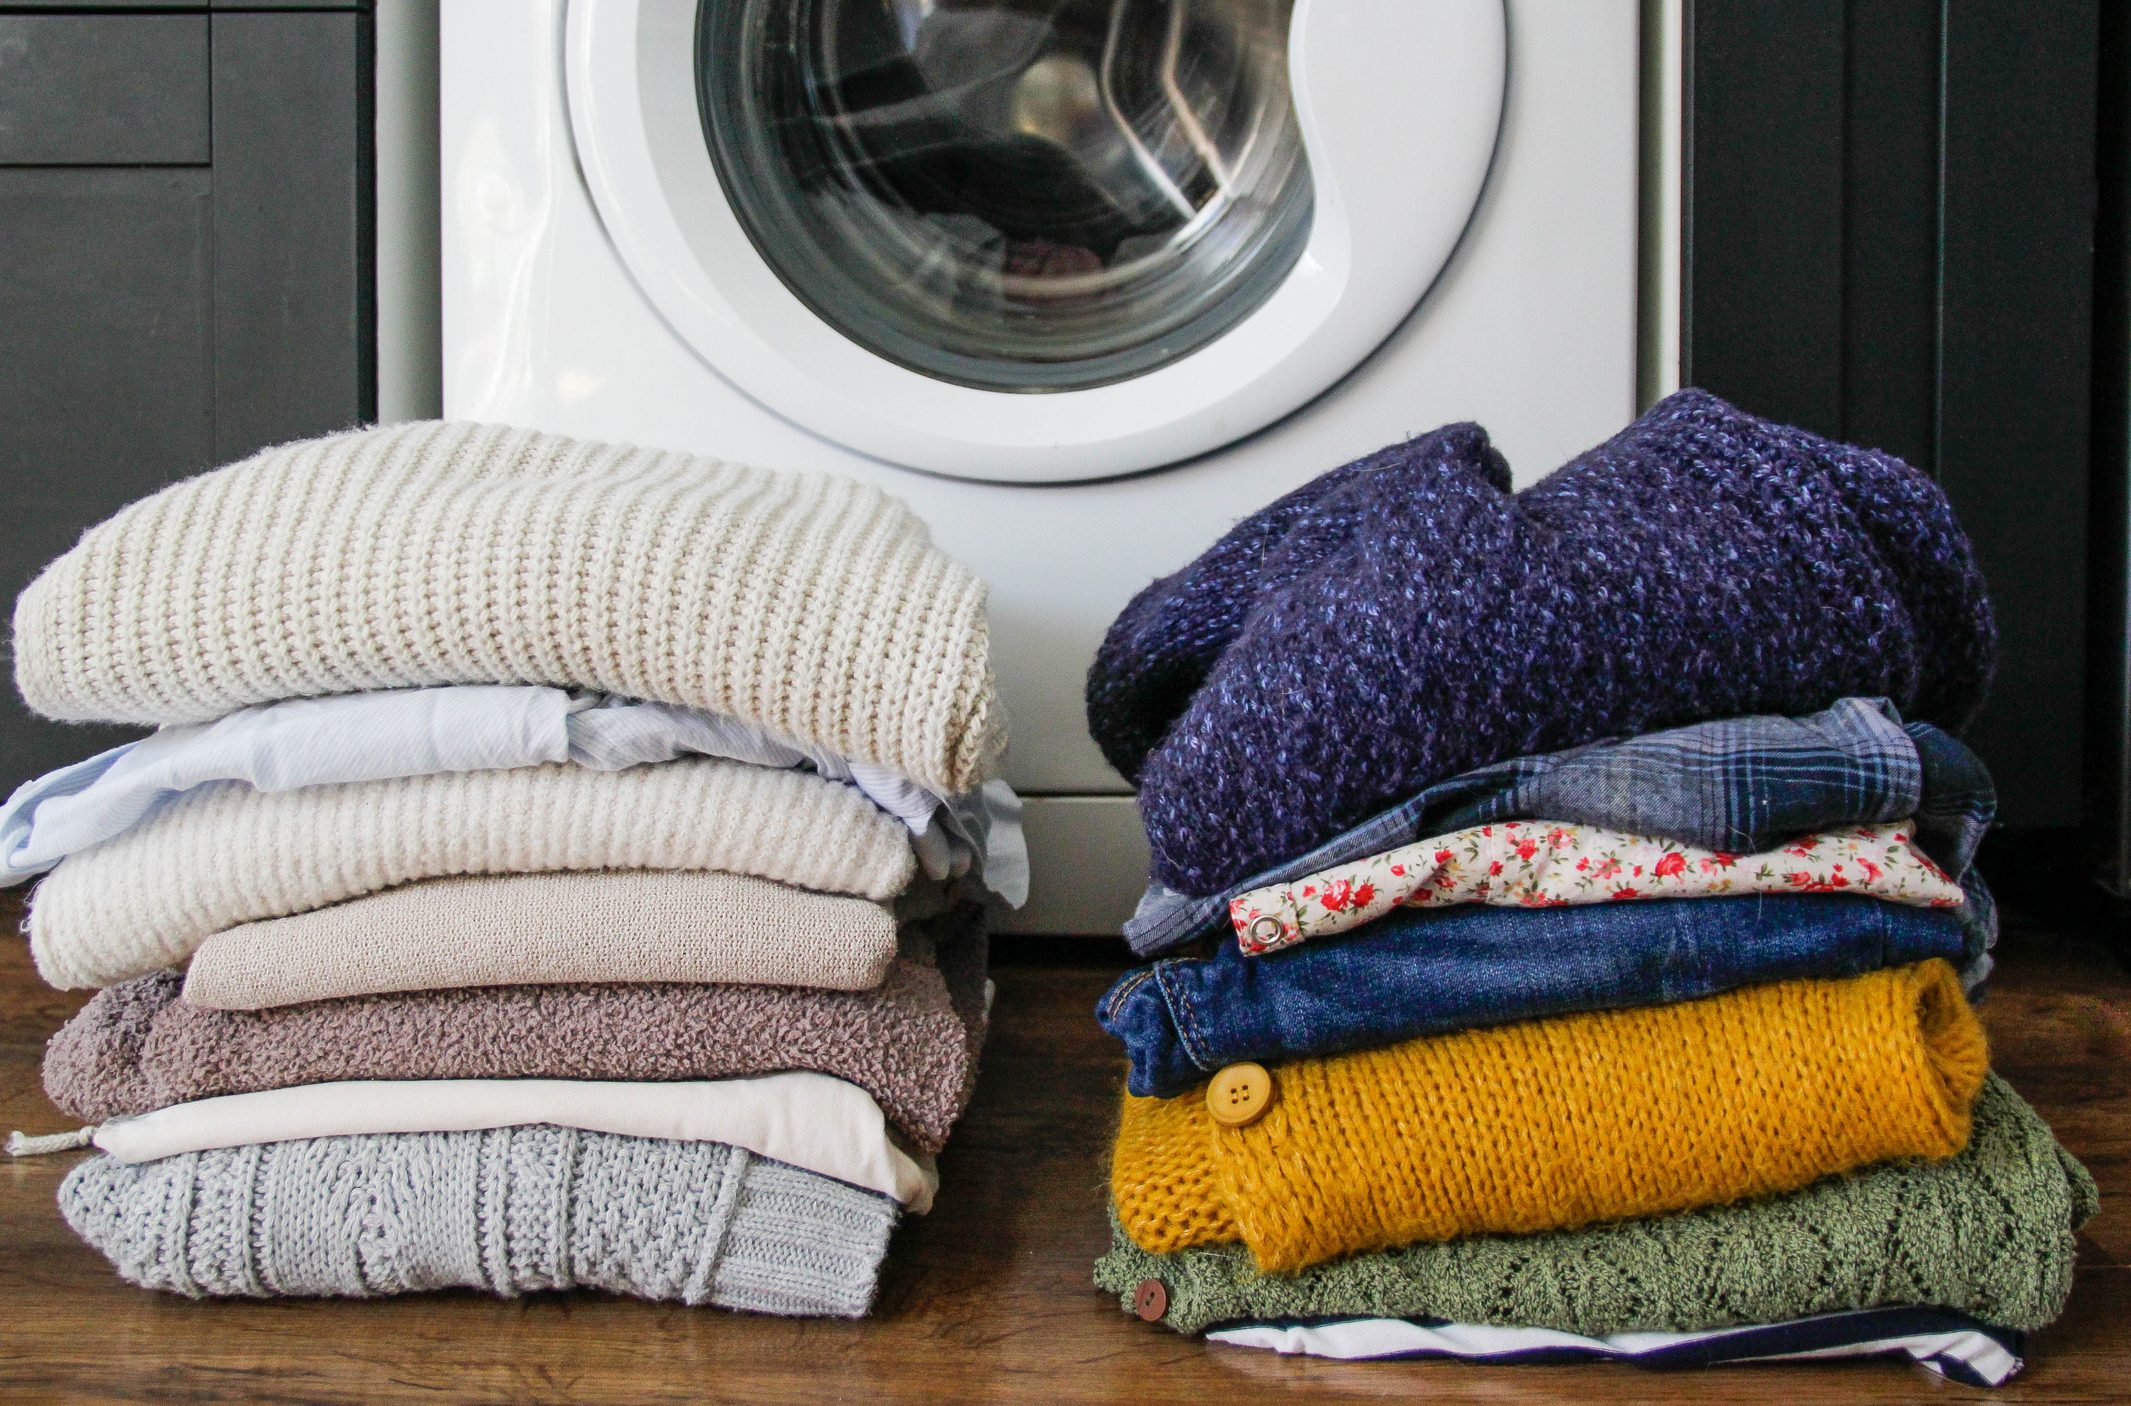 How to Wash and Maintain Wool Sweaters - Laundry Hacks 